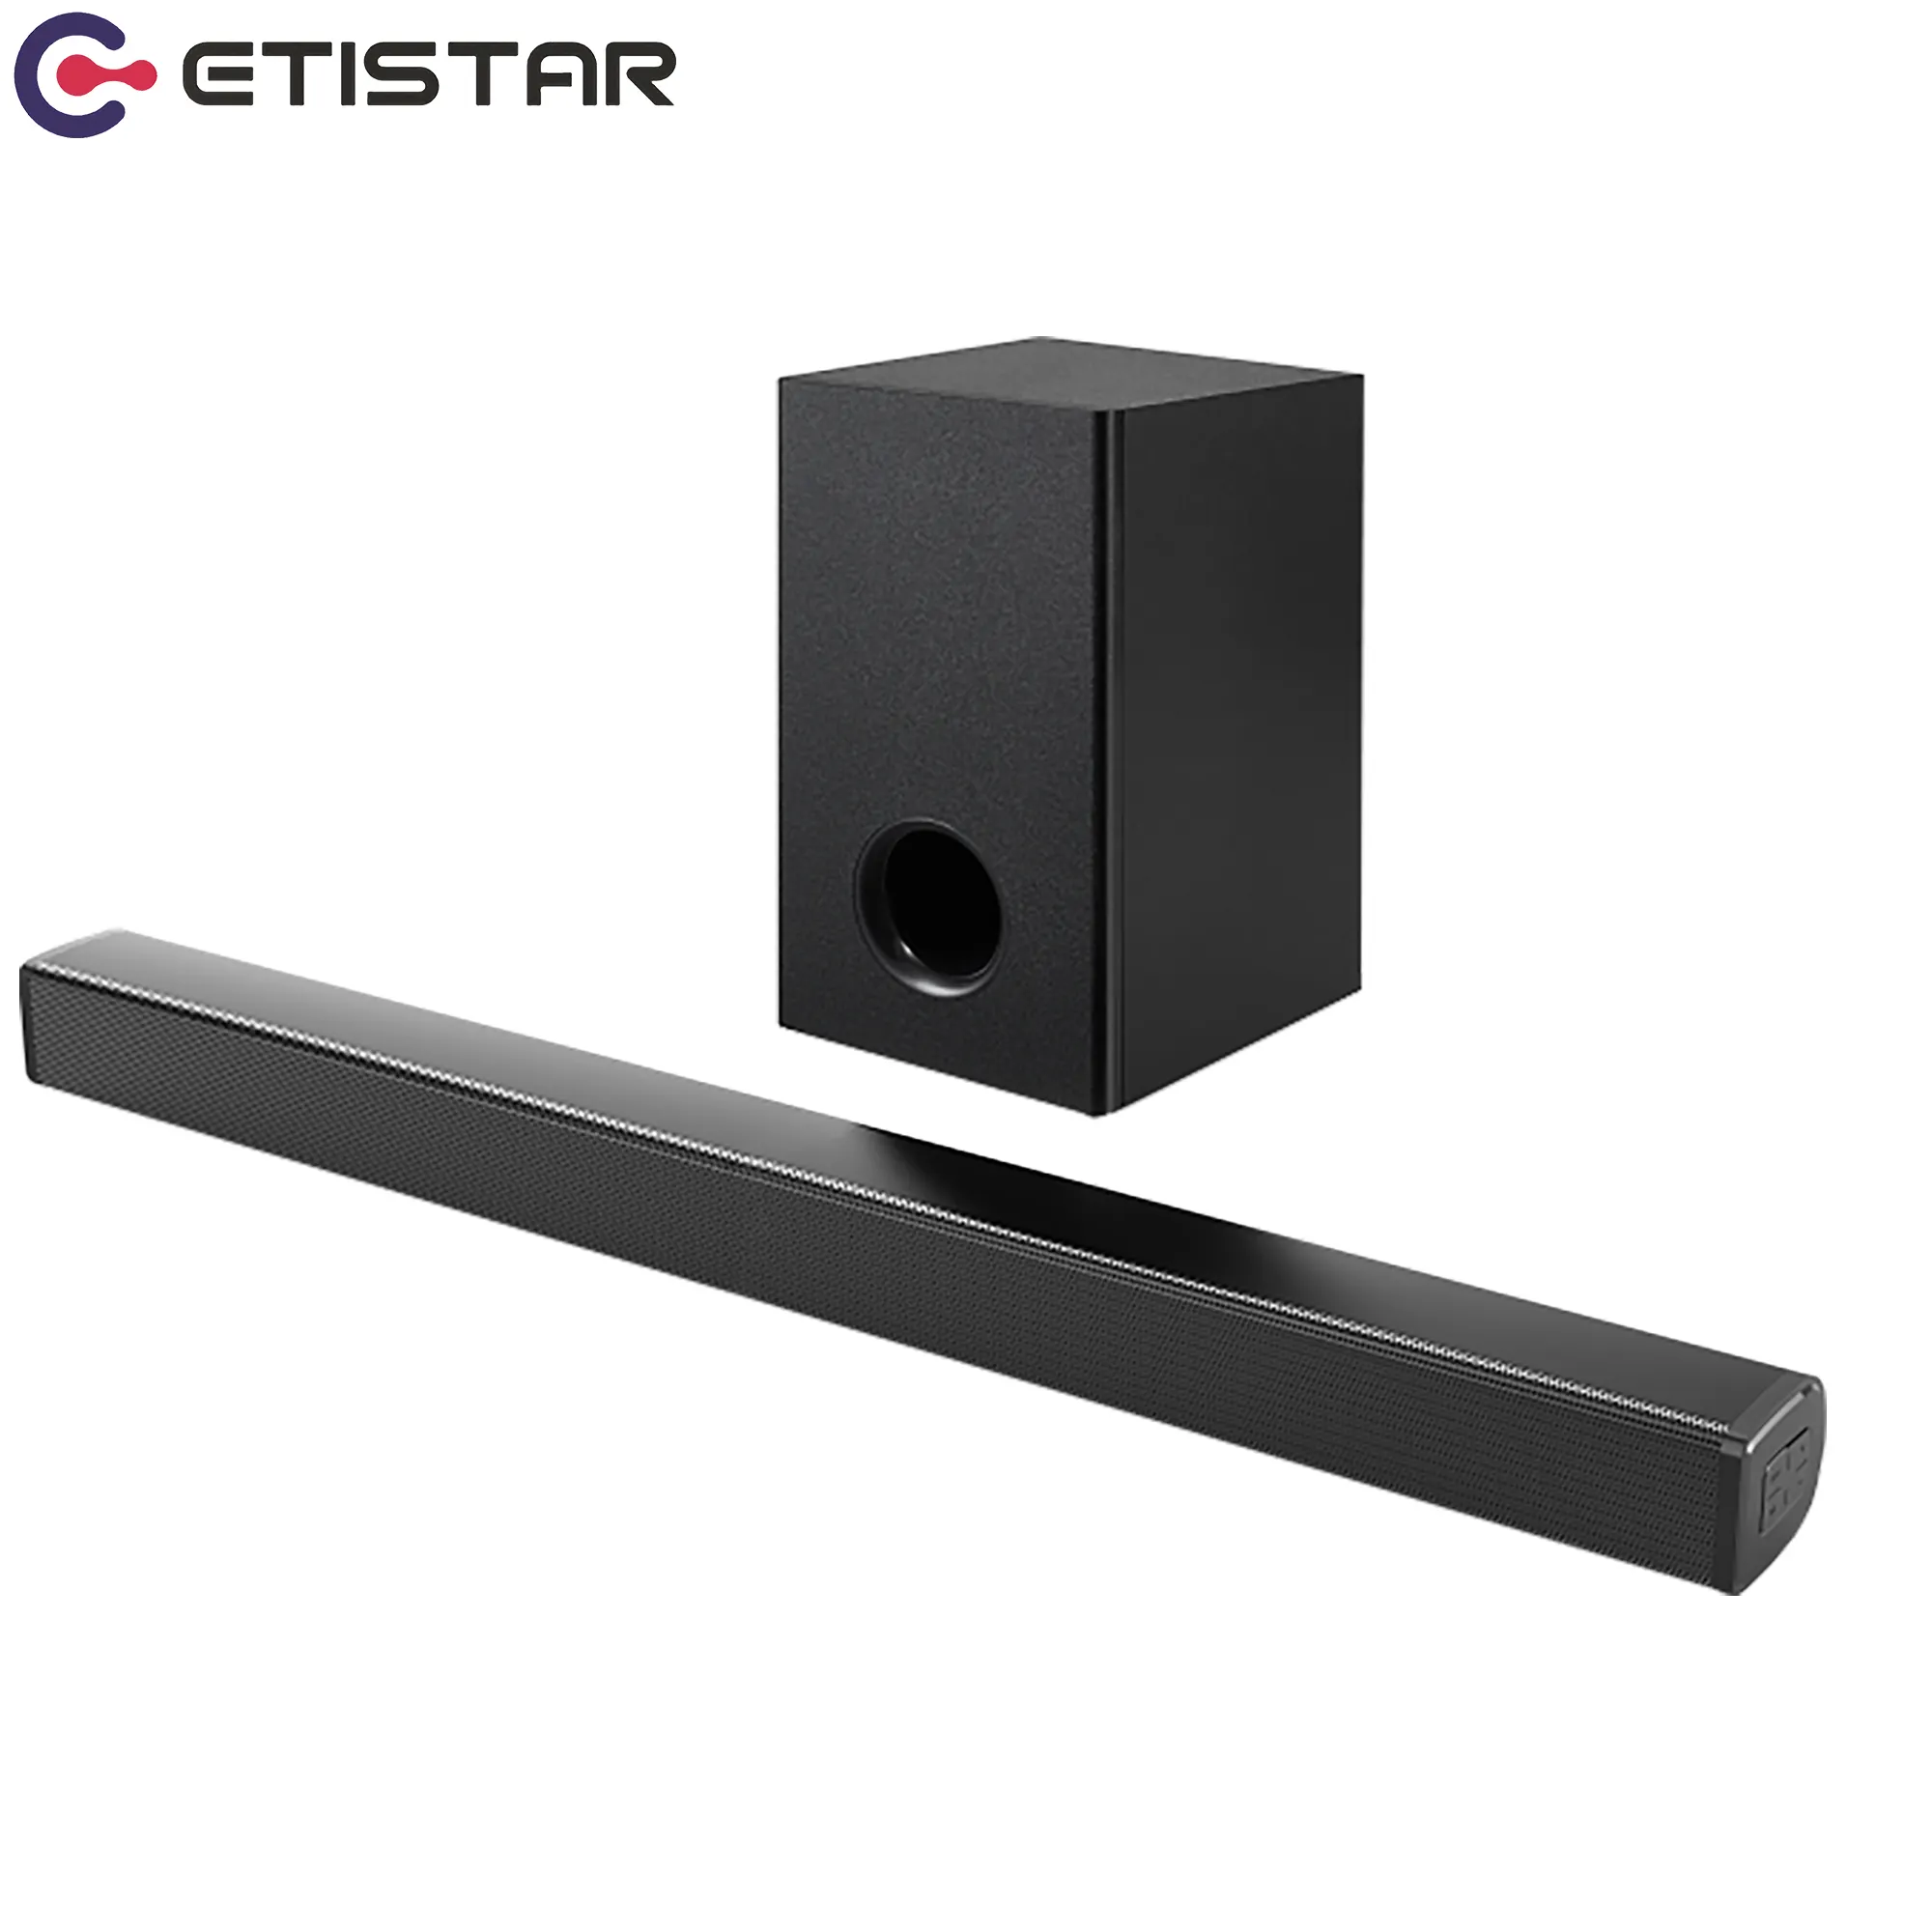 2023 New High Quality Sound Bar with subwoofer 2.1 Db Bluetooth Wireless SoundBar surround Speaker Home Theatre system For Tv